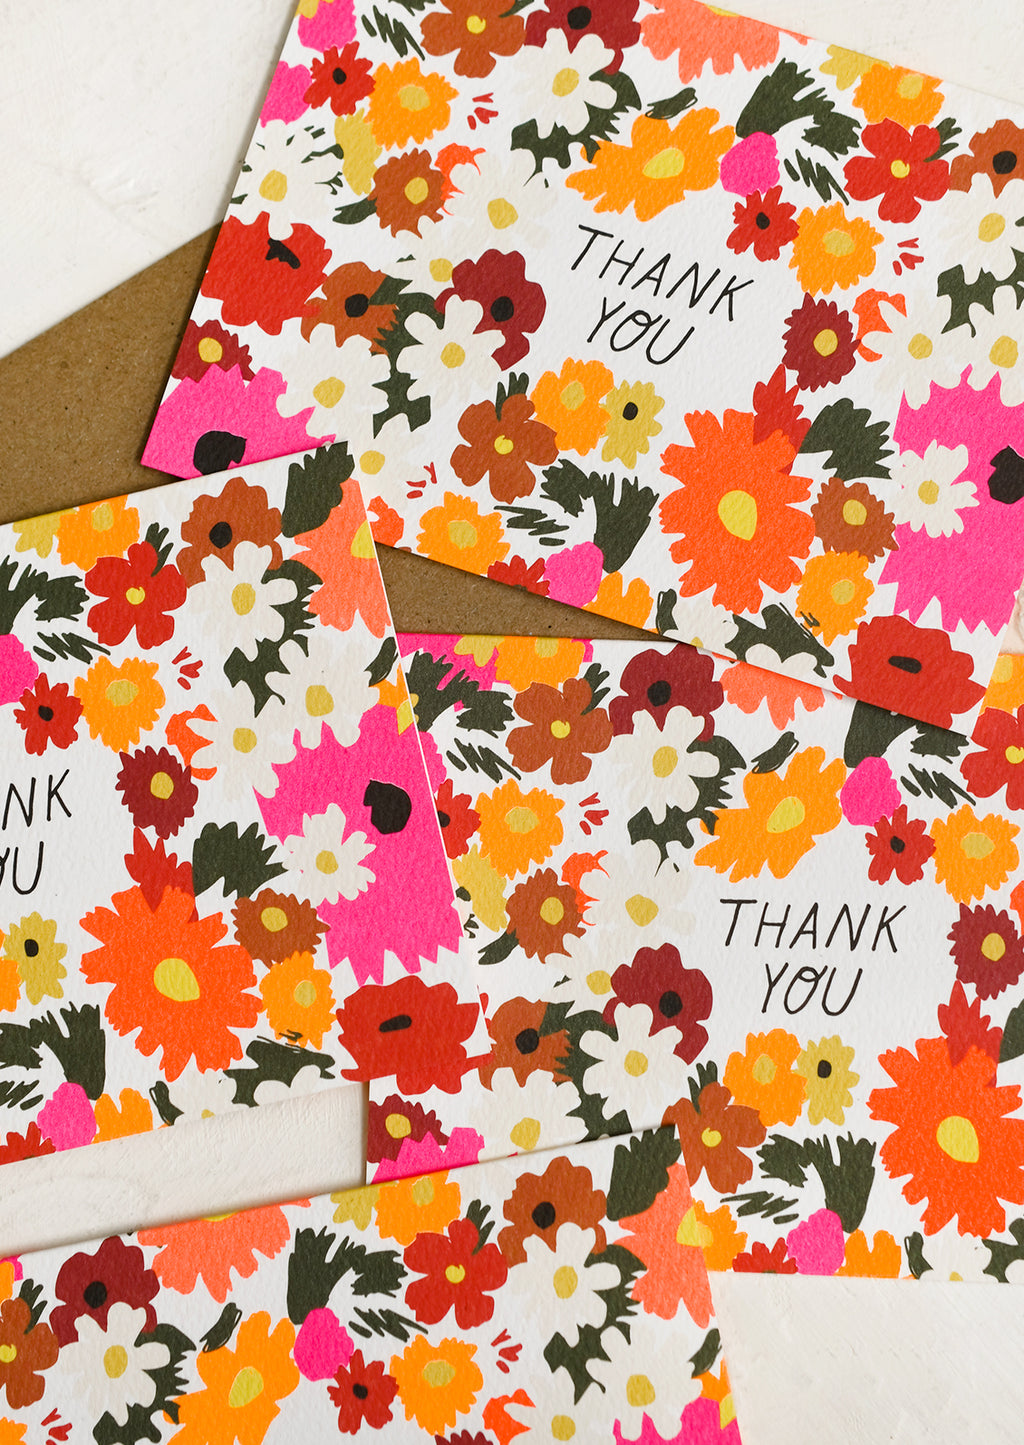 1: A set of neon daisy print thank you cards.